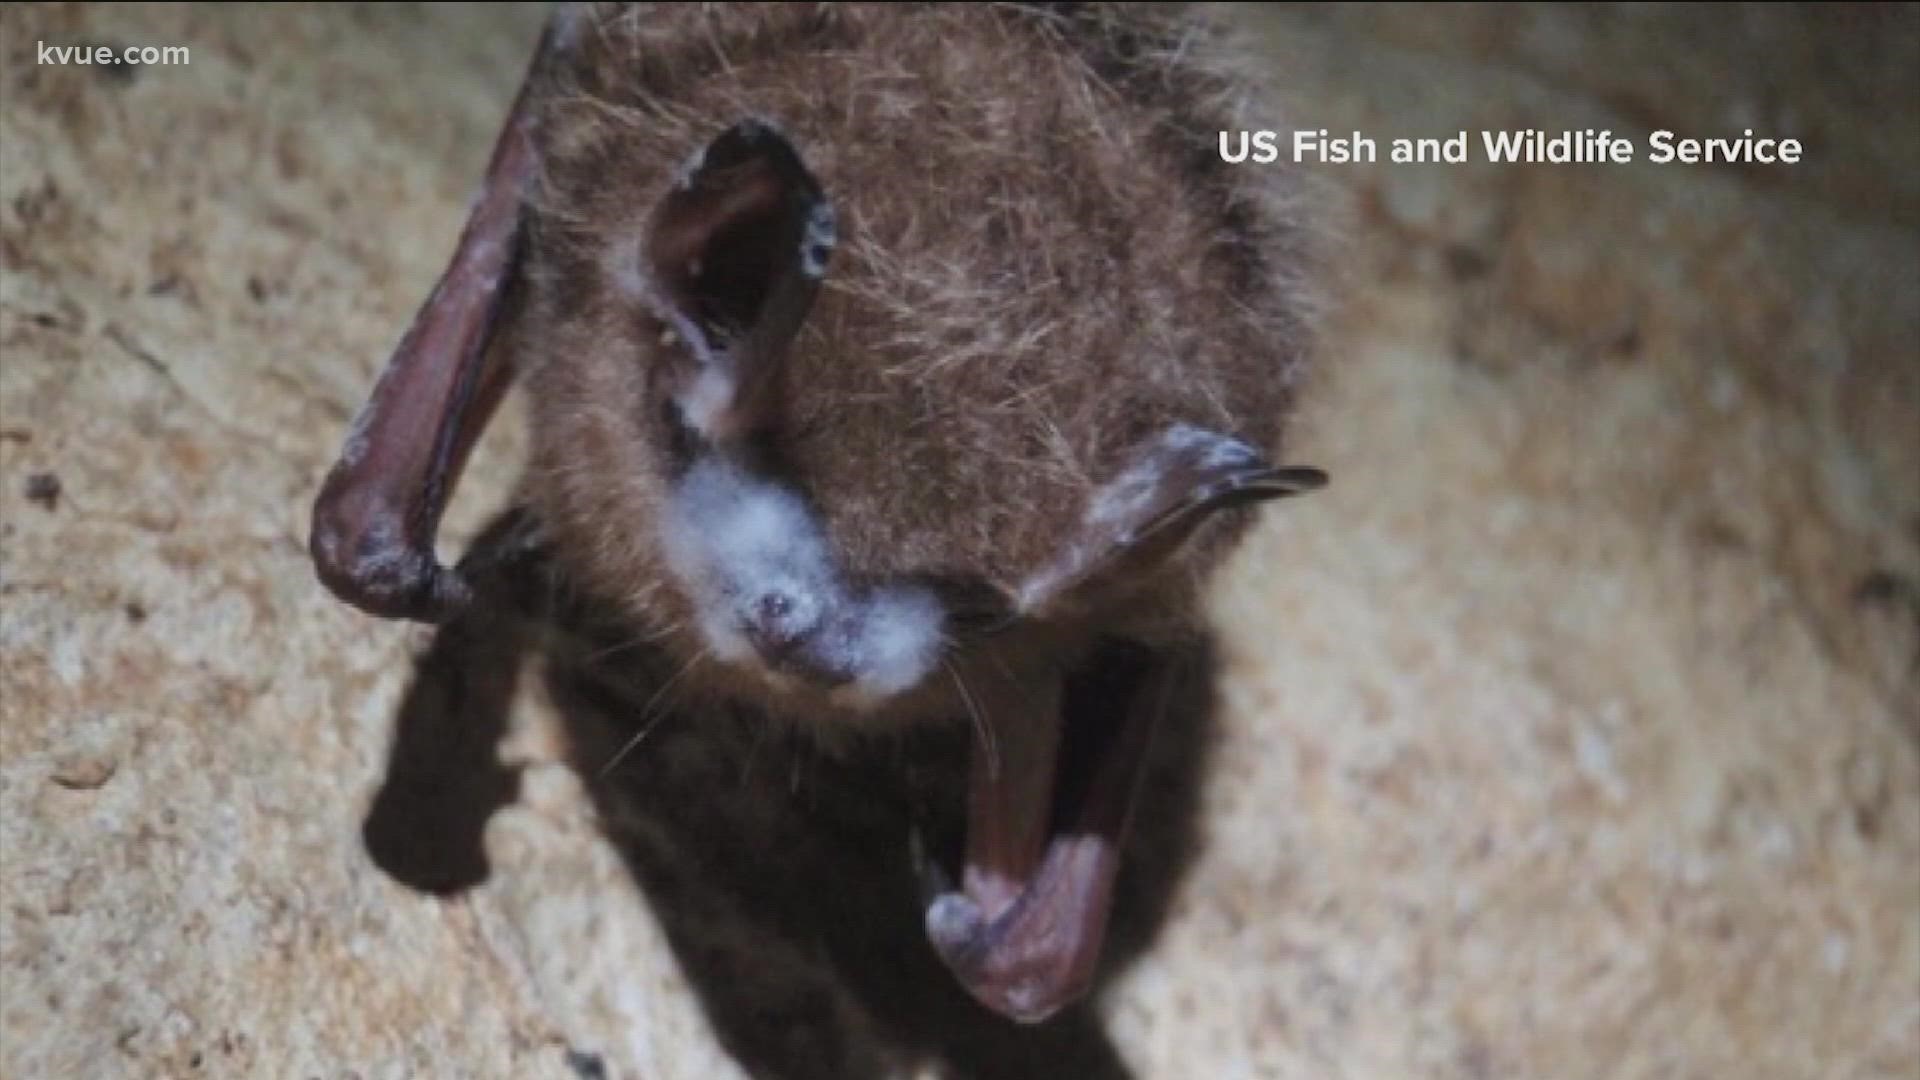 The bat was discovered in the area of 715 Discovery Blvd. at the Discovery Business Park.